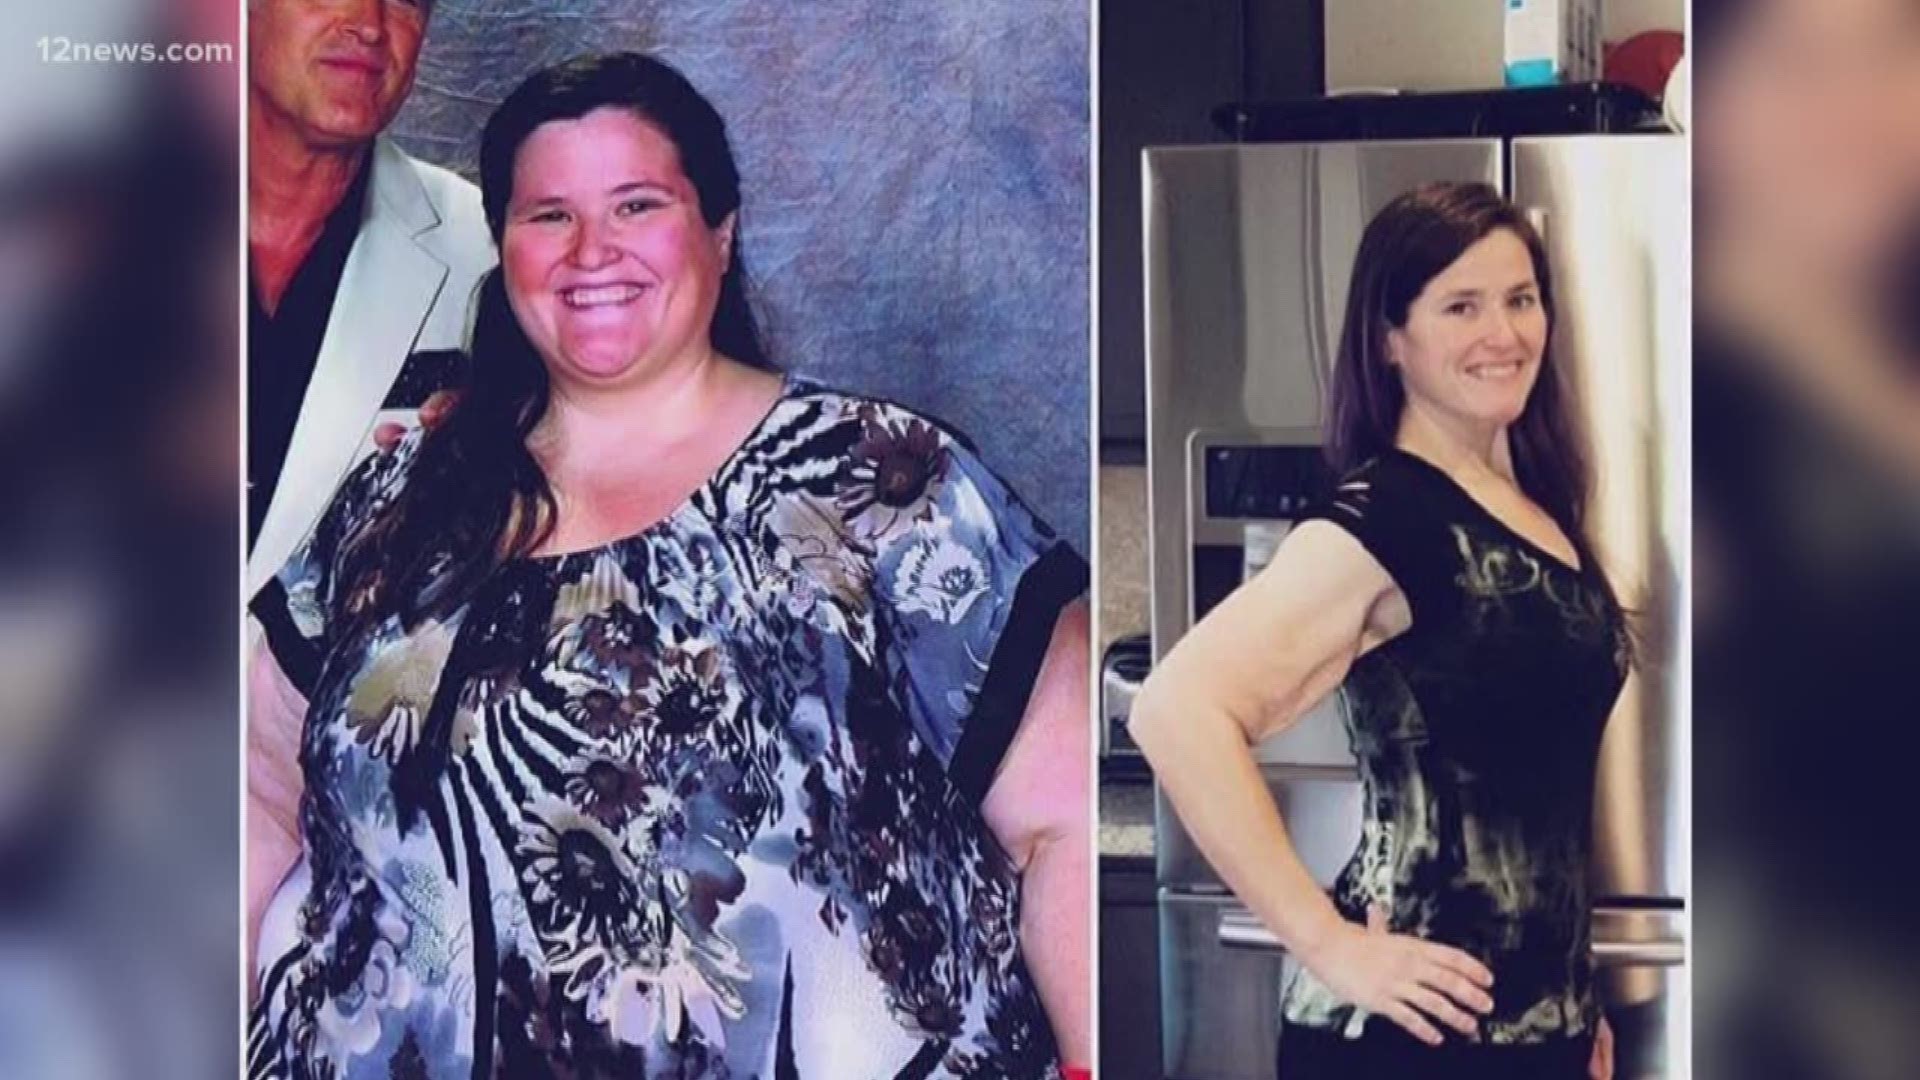 April Wood weighed 440 pounds and felt like she was depriving her children of their childhood because she was too out of shape. Now, after losing 280 lbs April needs your help to complete her transformation.